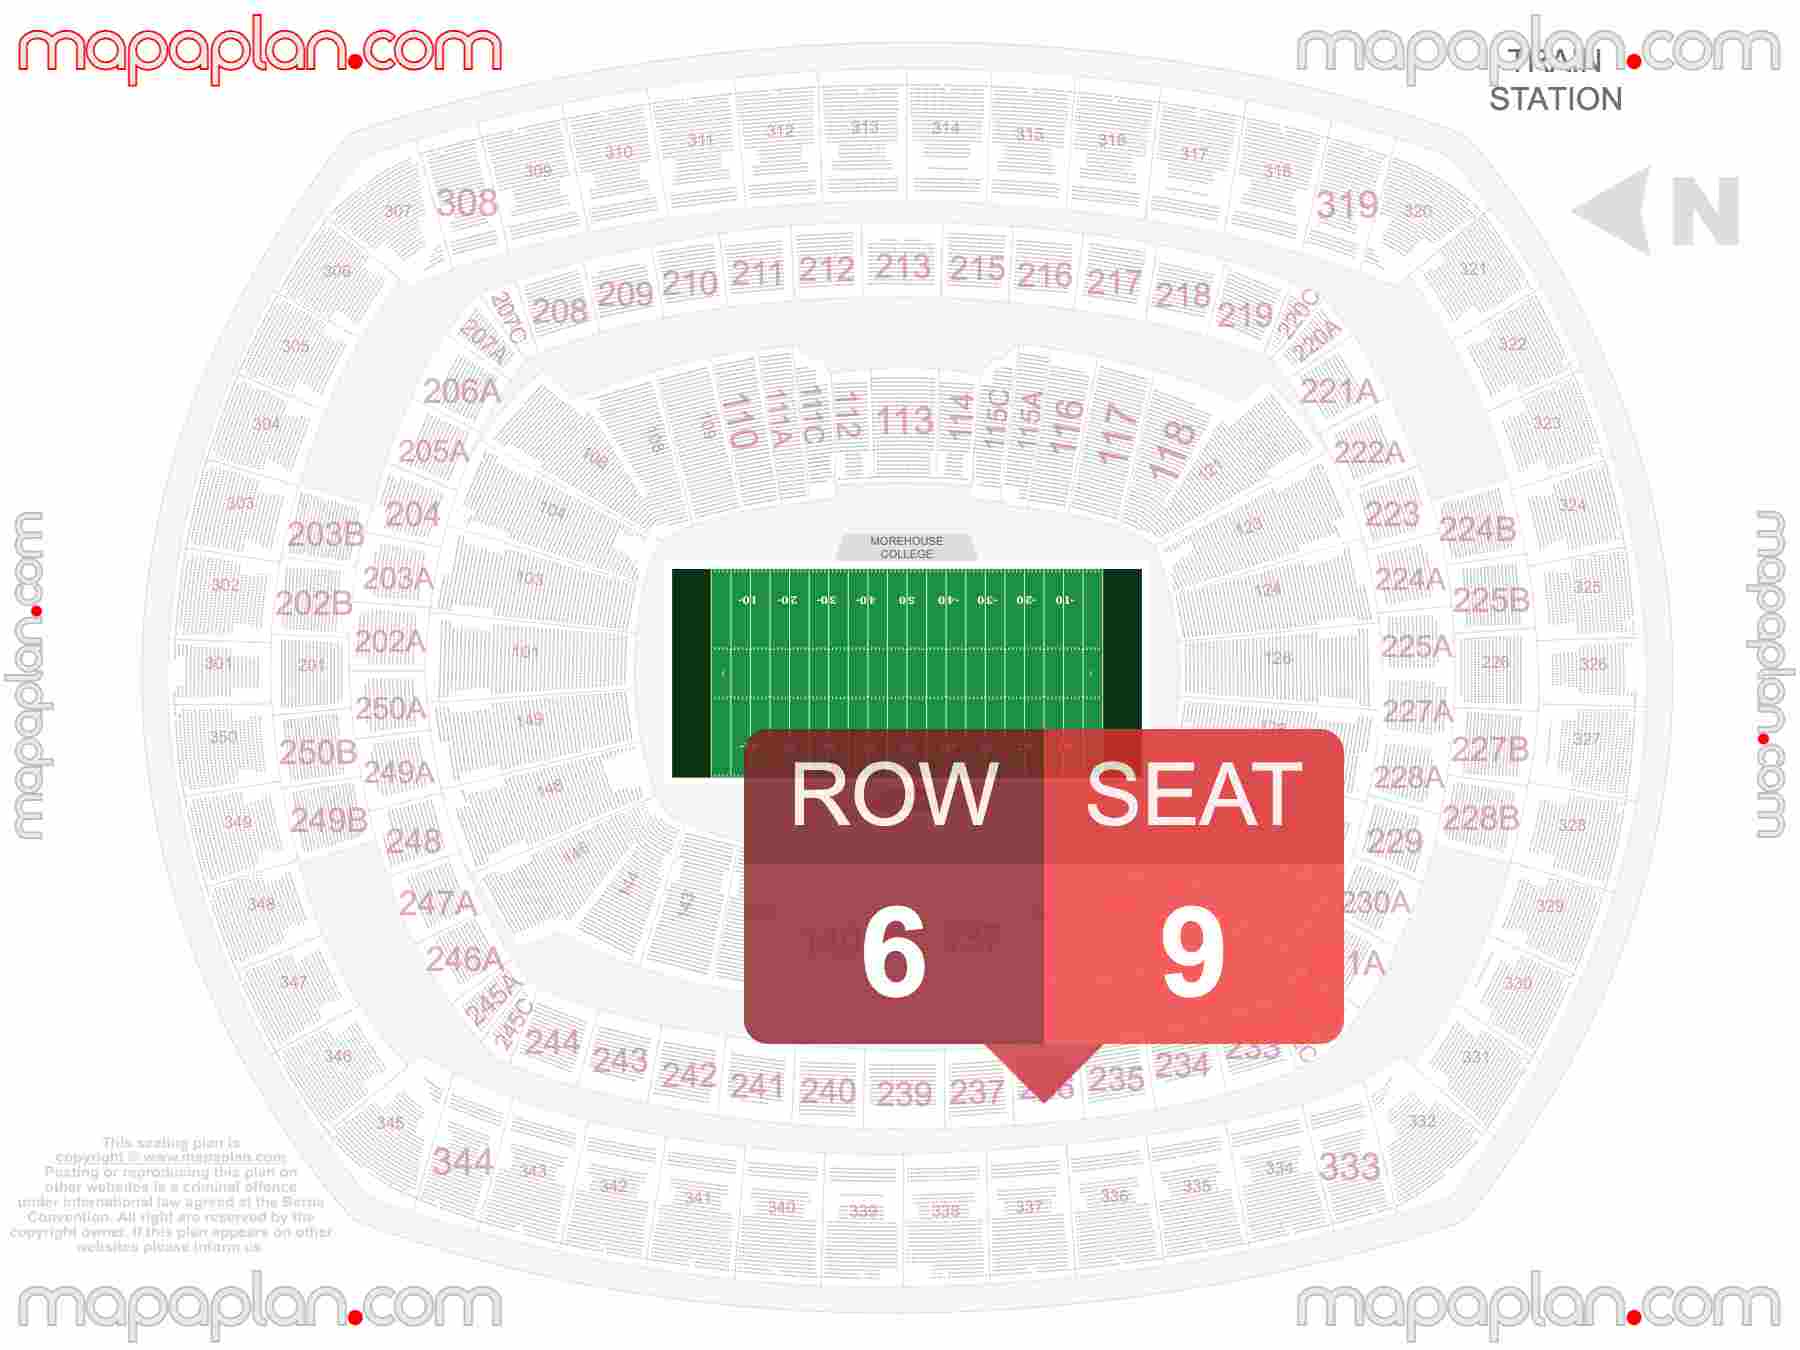 East Rutherford MetLife Stadium seating chart New York Giants & Jets football inside capacity view arrangement plan - Interactive virtual 3d best seats & rows detailed stadium image configuration layout